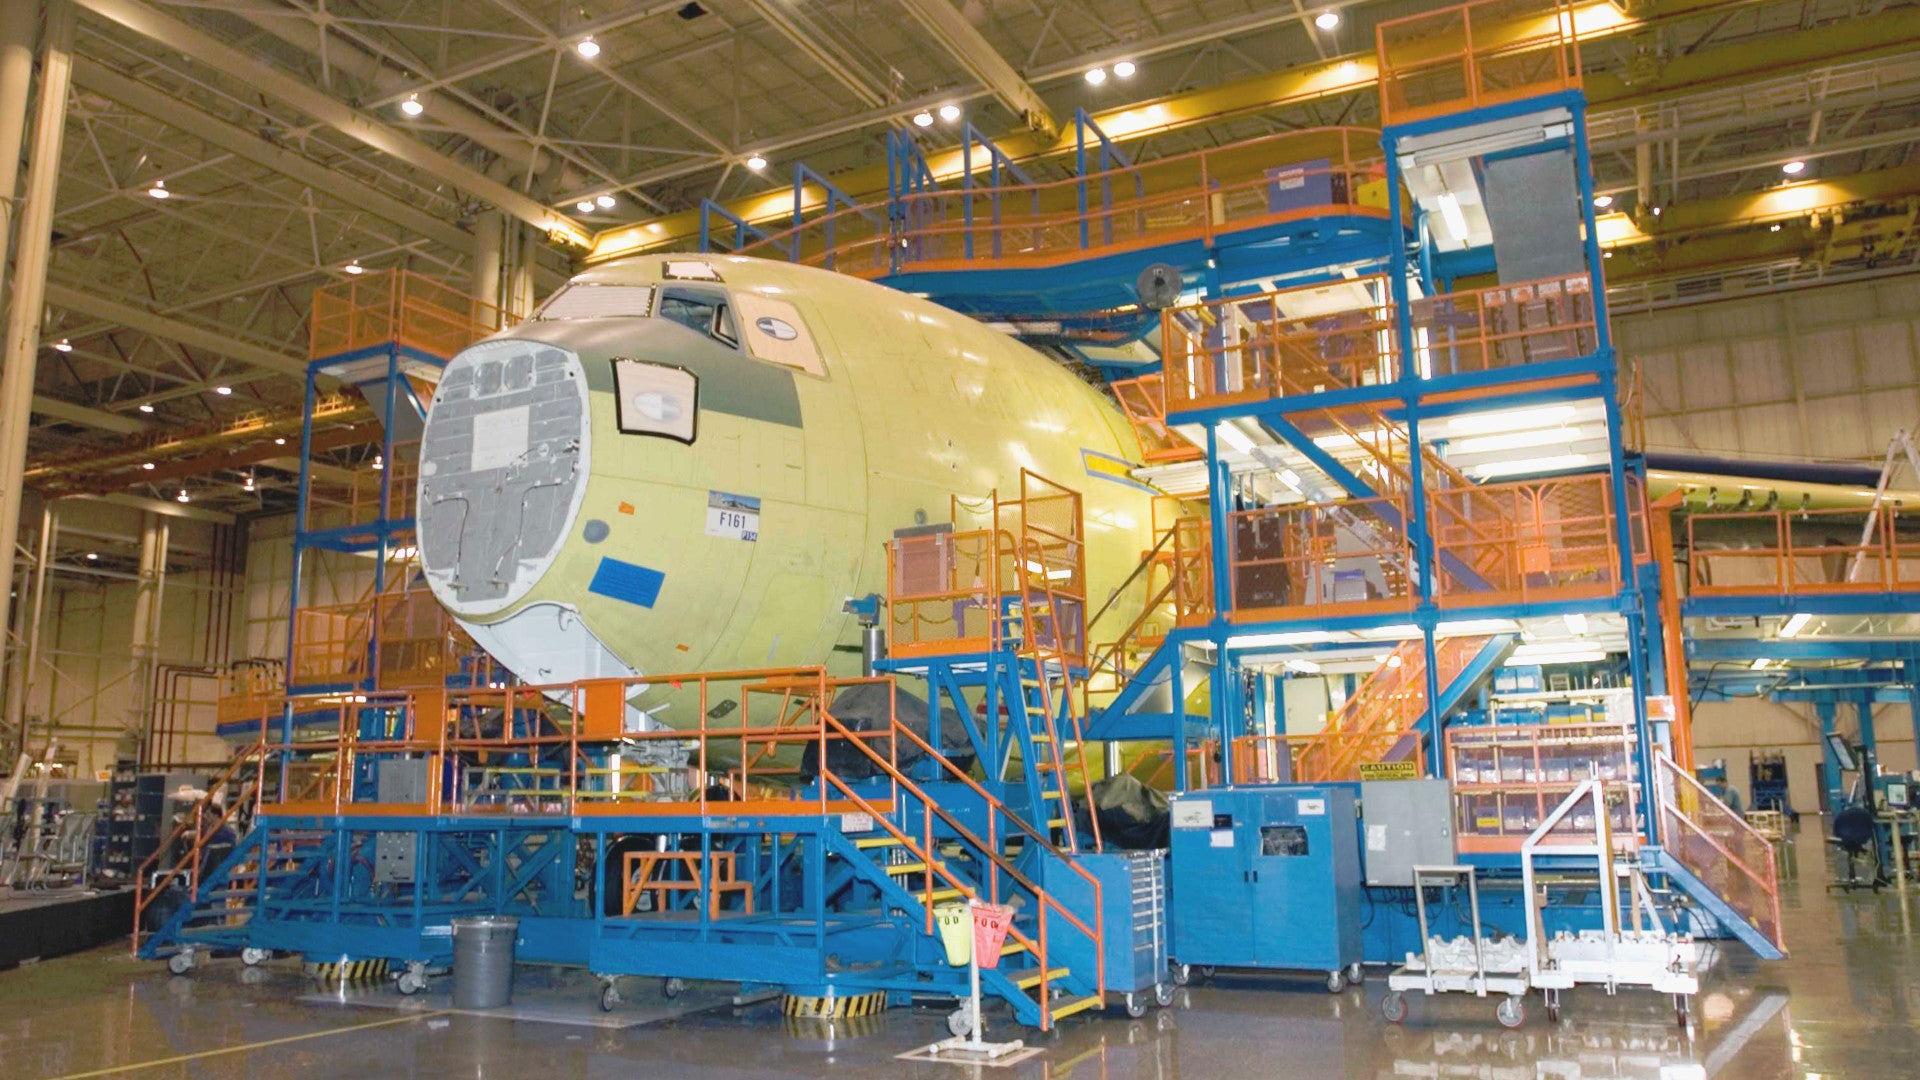 Boeing Is Selling Off Its Historic C-17 Production Line Facility In Long Beach